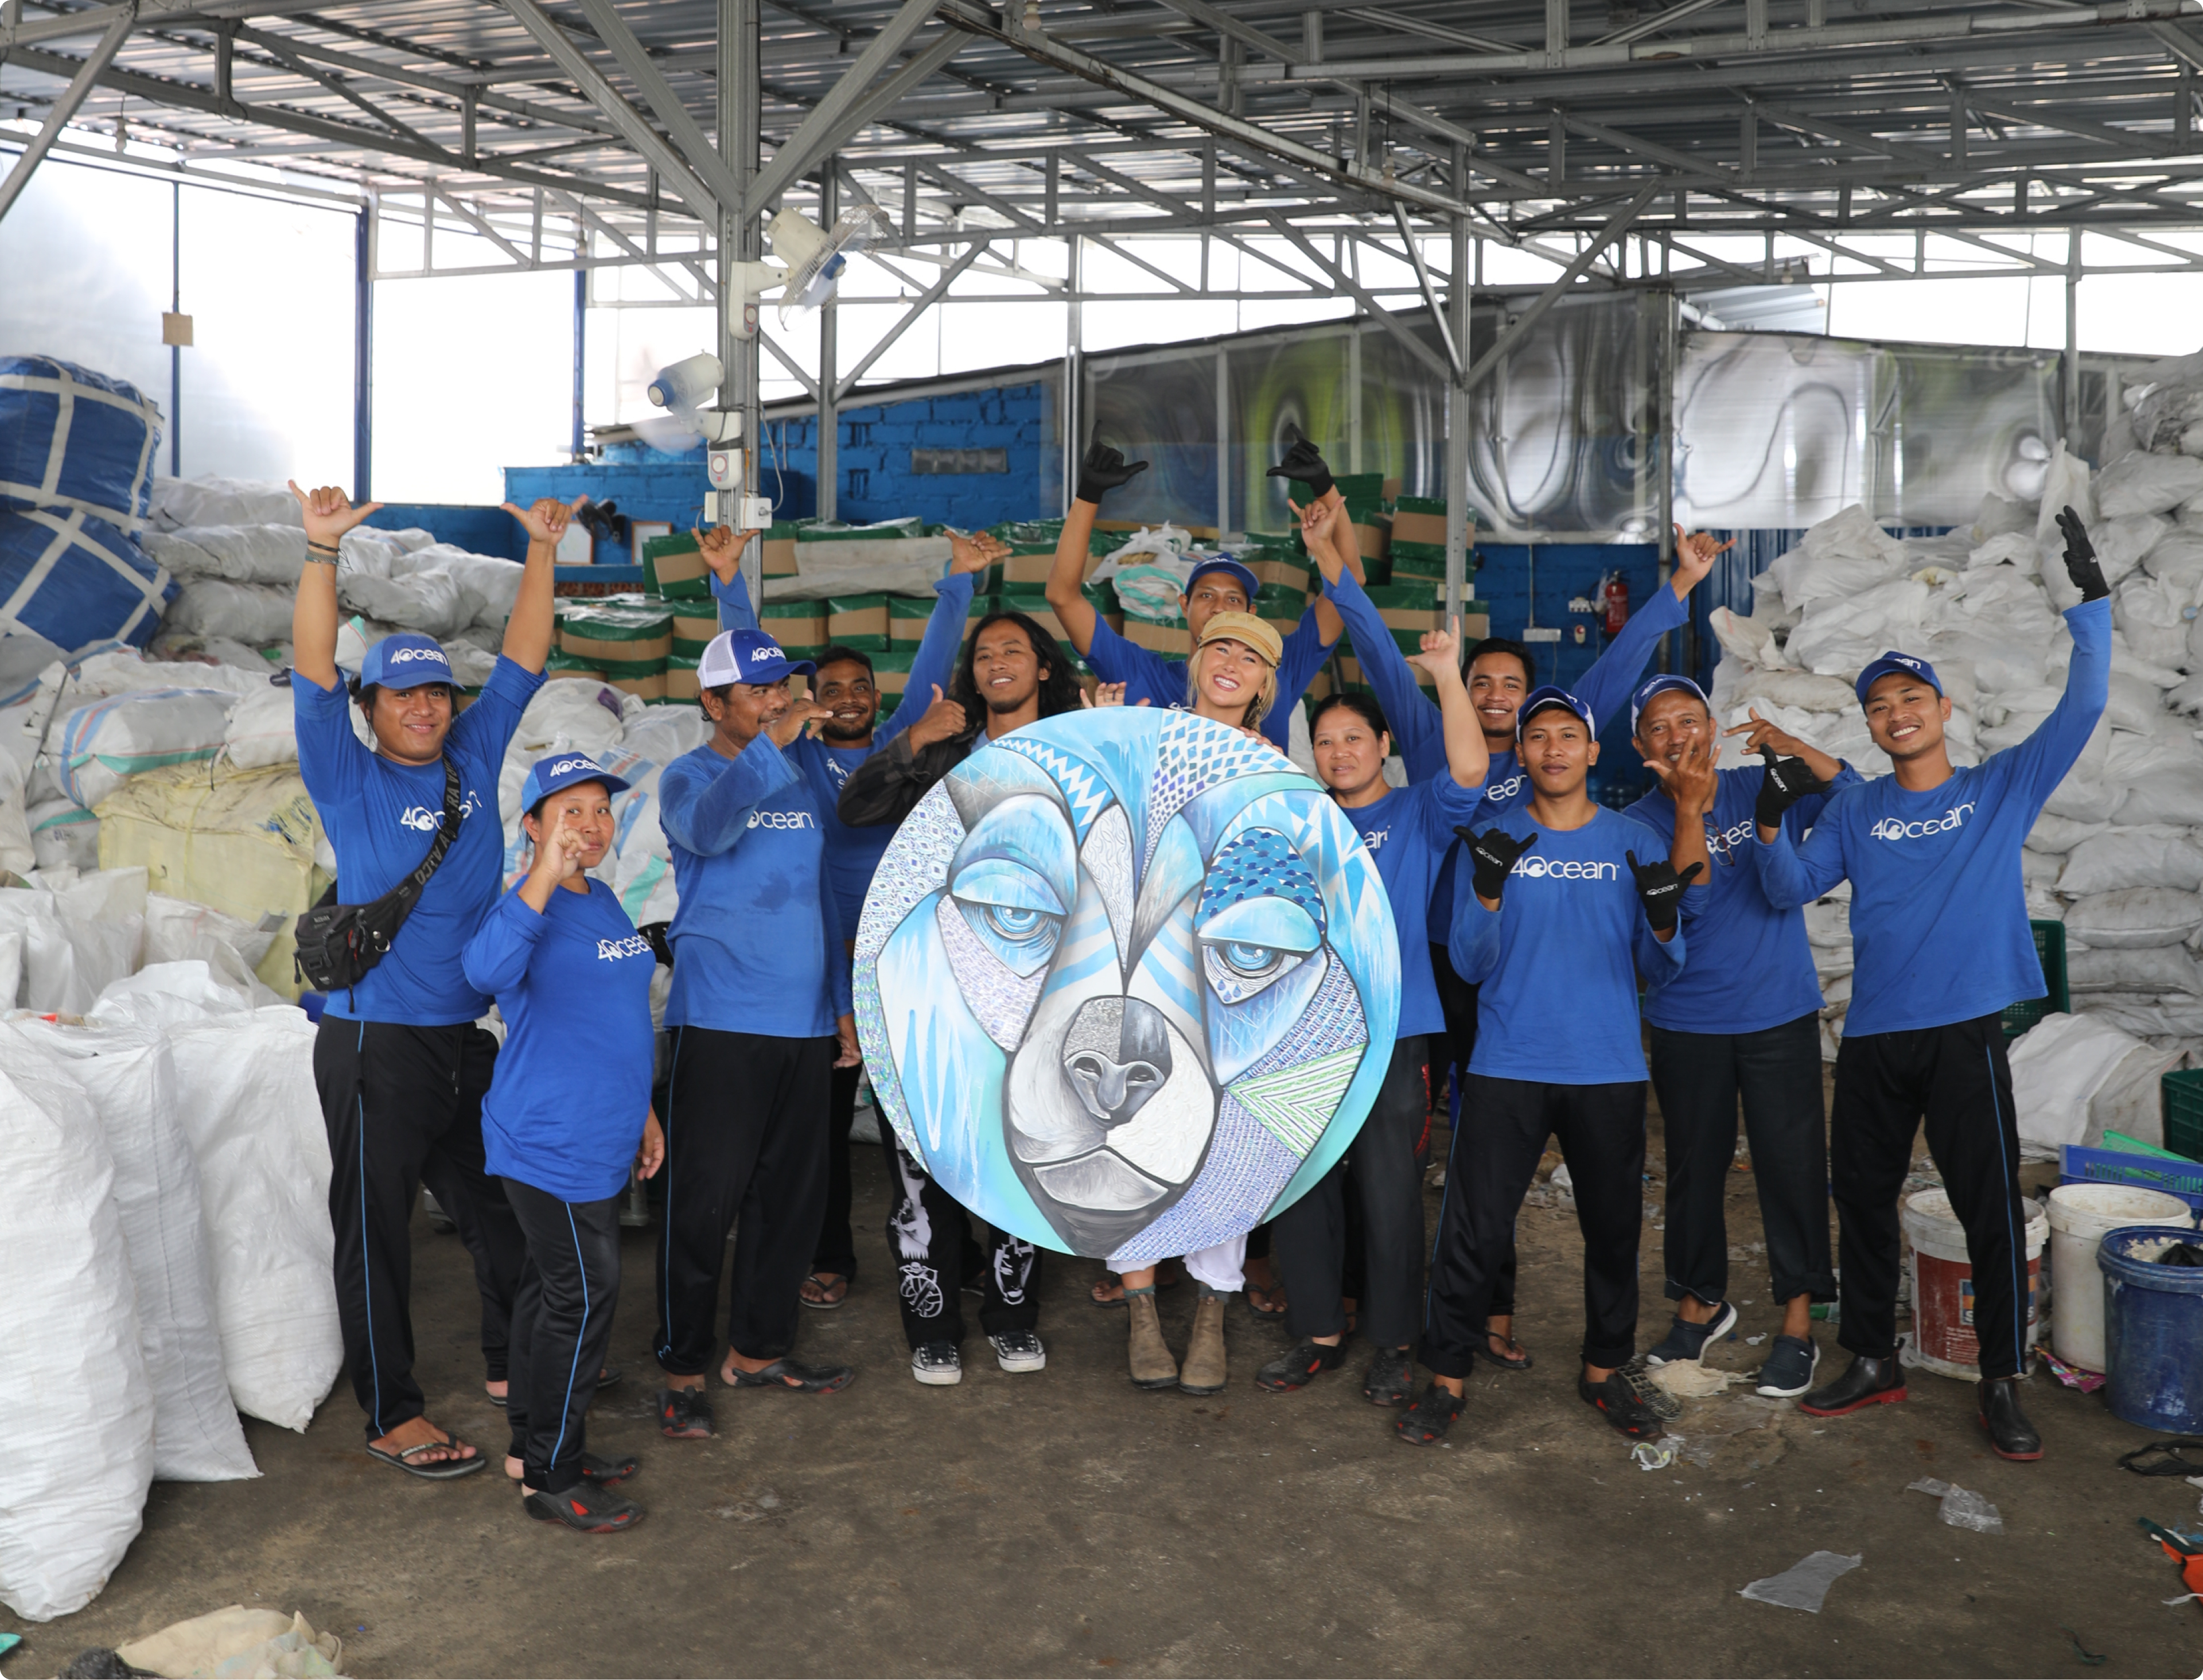 Group photo of 4ocean volunteers and in the middle is an artwork.